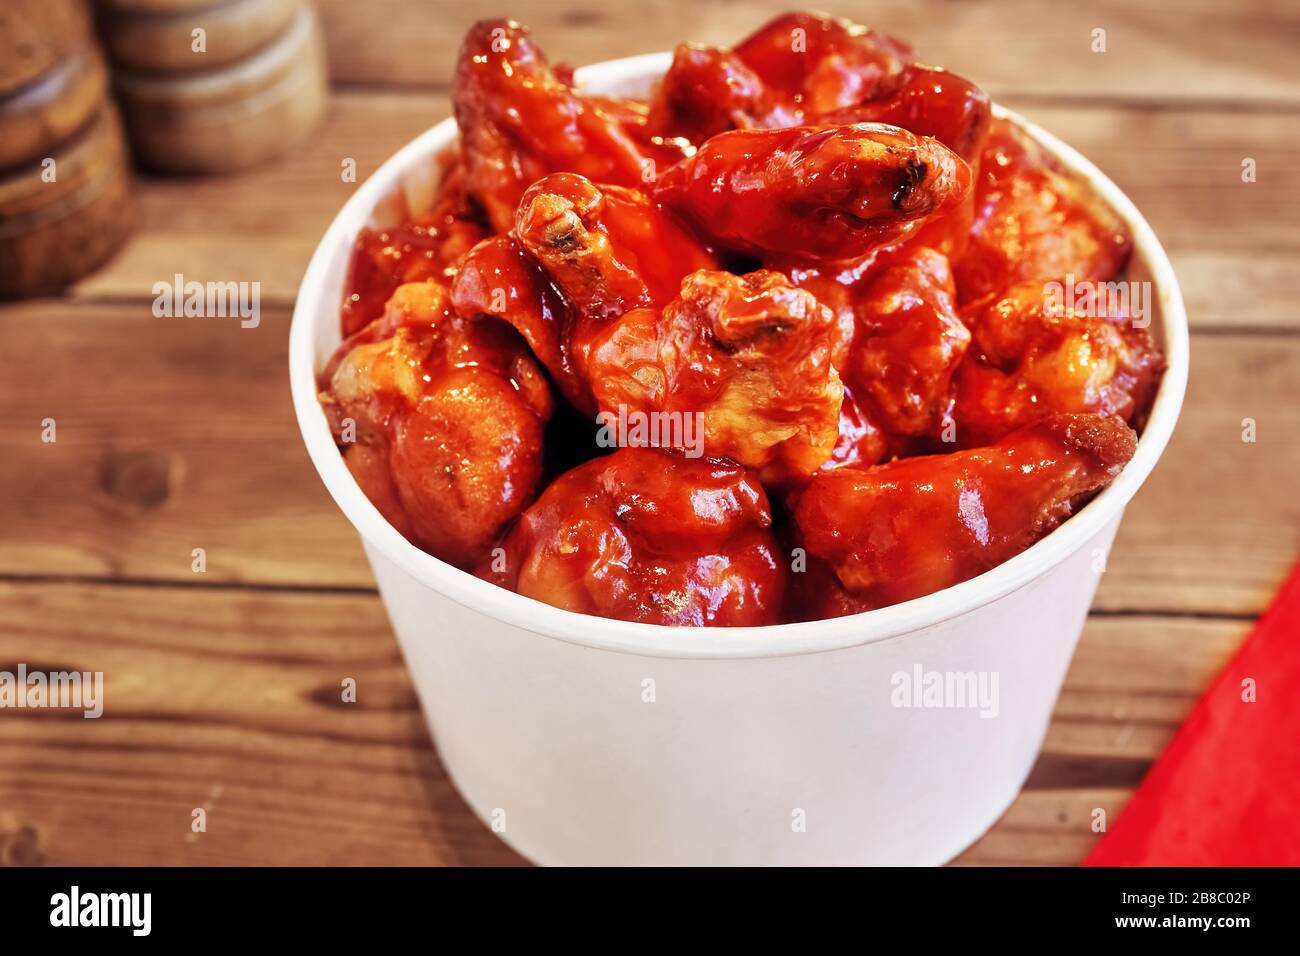 Bucket of chicken wings with hot chili sauce on wooden table Stock Photo